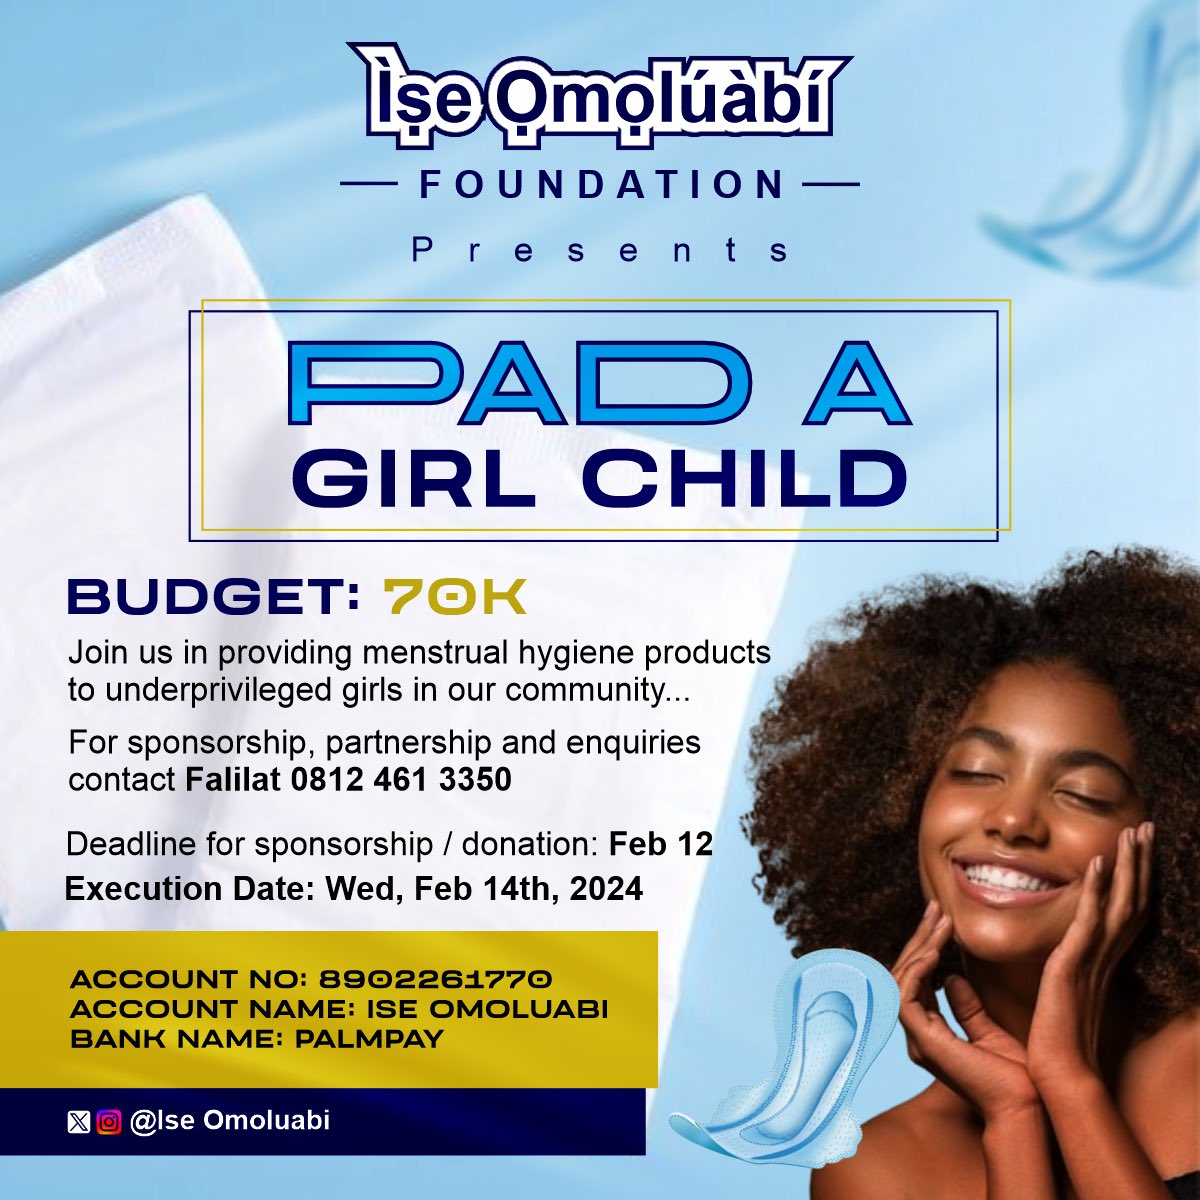 Empower her journey and support the 'Pad a Girl' program brought to you by Ise Omoluabi foundation to empower young girls, support, and educate them about personal hygiene and menstruation.

Amount needed: 70k
Amount raised: 

8902261770
Ise Omoluabi 
Palmpay

#PadAGirl